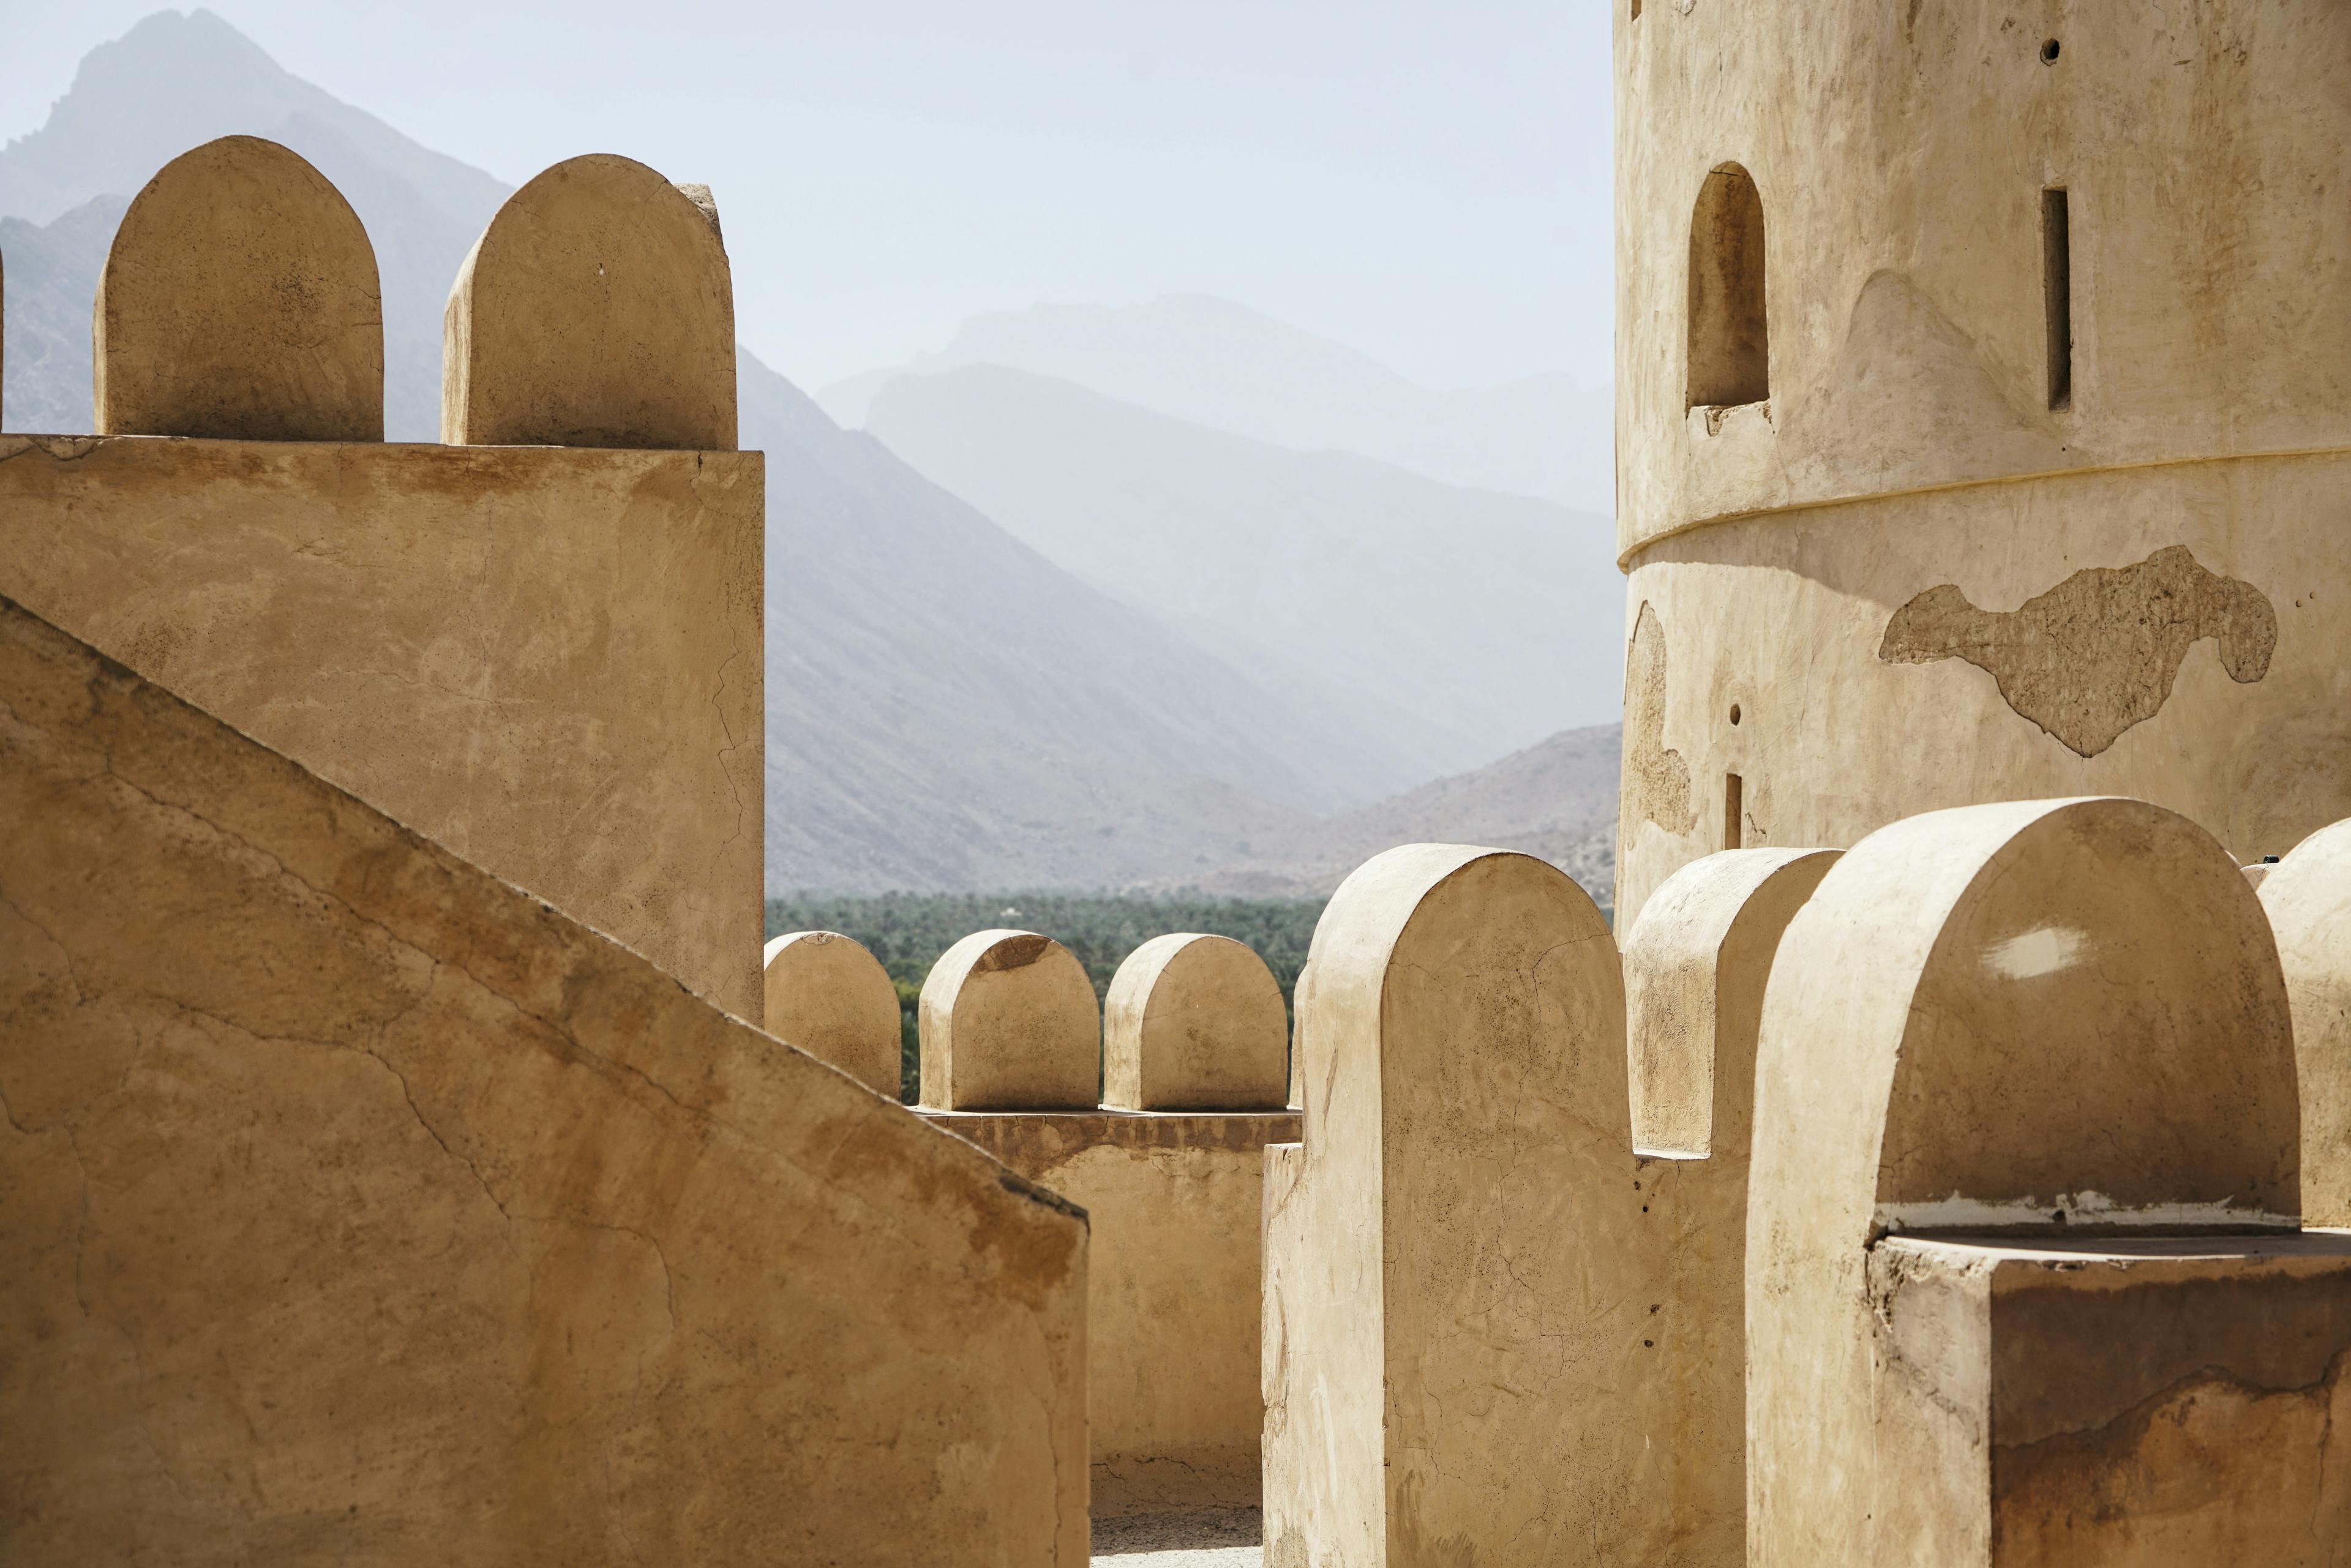 We're reimagining a fairer way to visit Oman